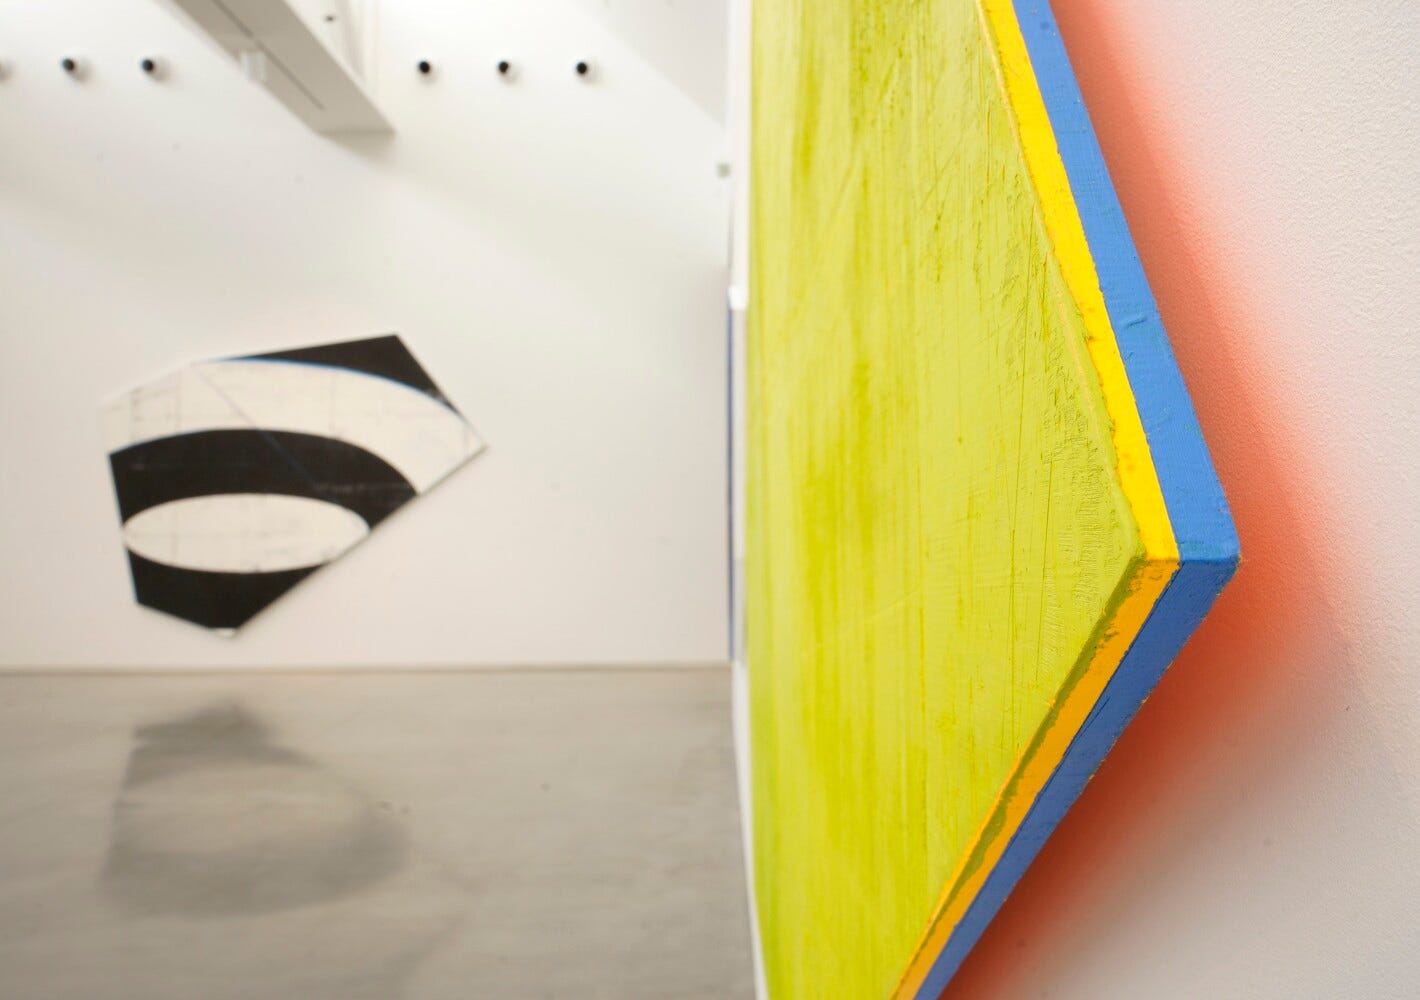 Rockland gallery makes way for the shapes of David Row